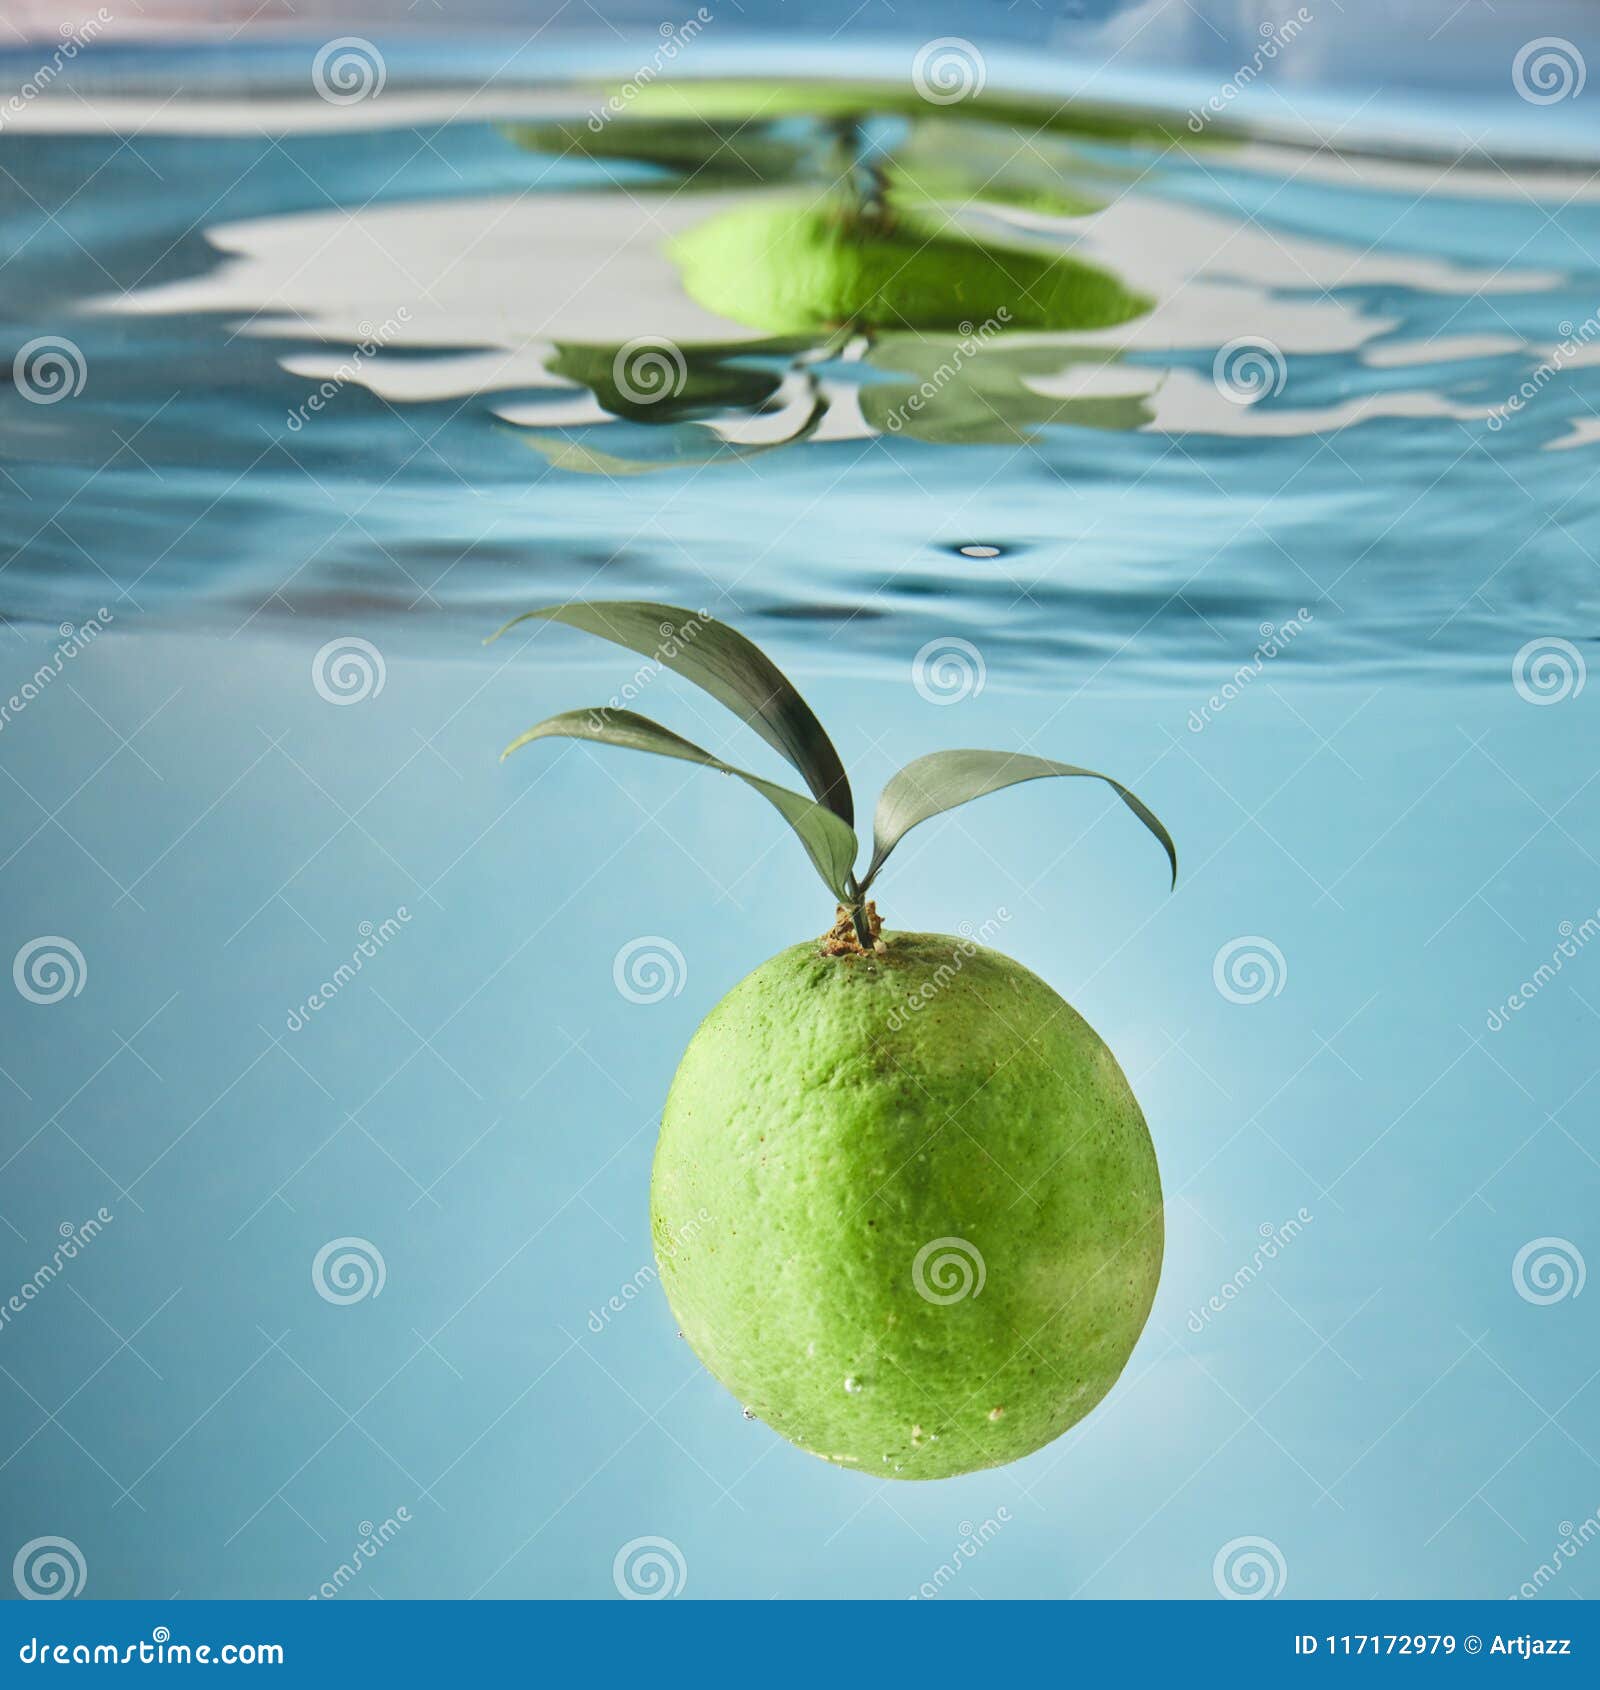 Ripe Lime with Leaves Falls into the Water Stock Image - Image of ...